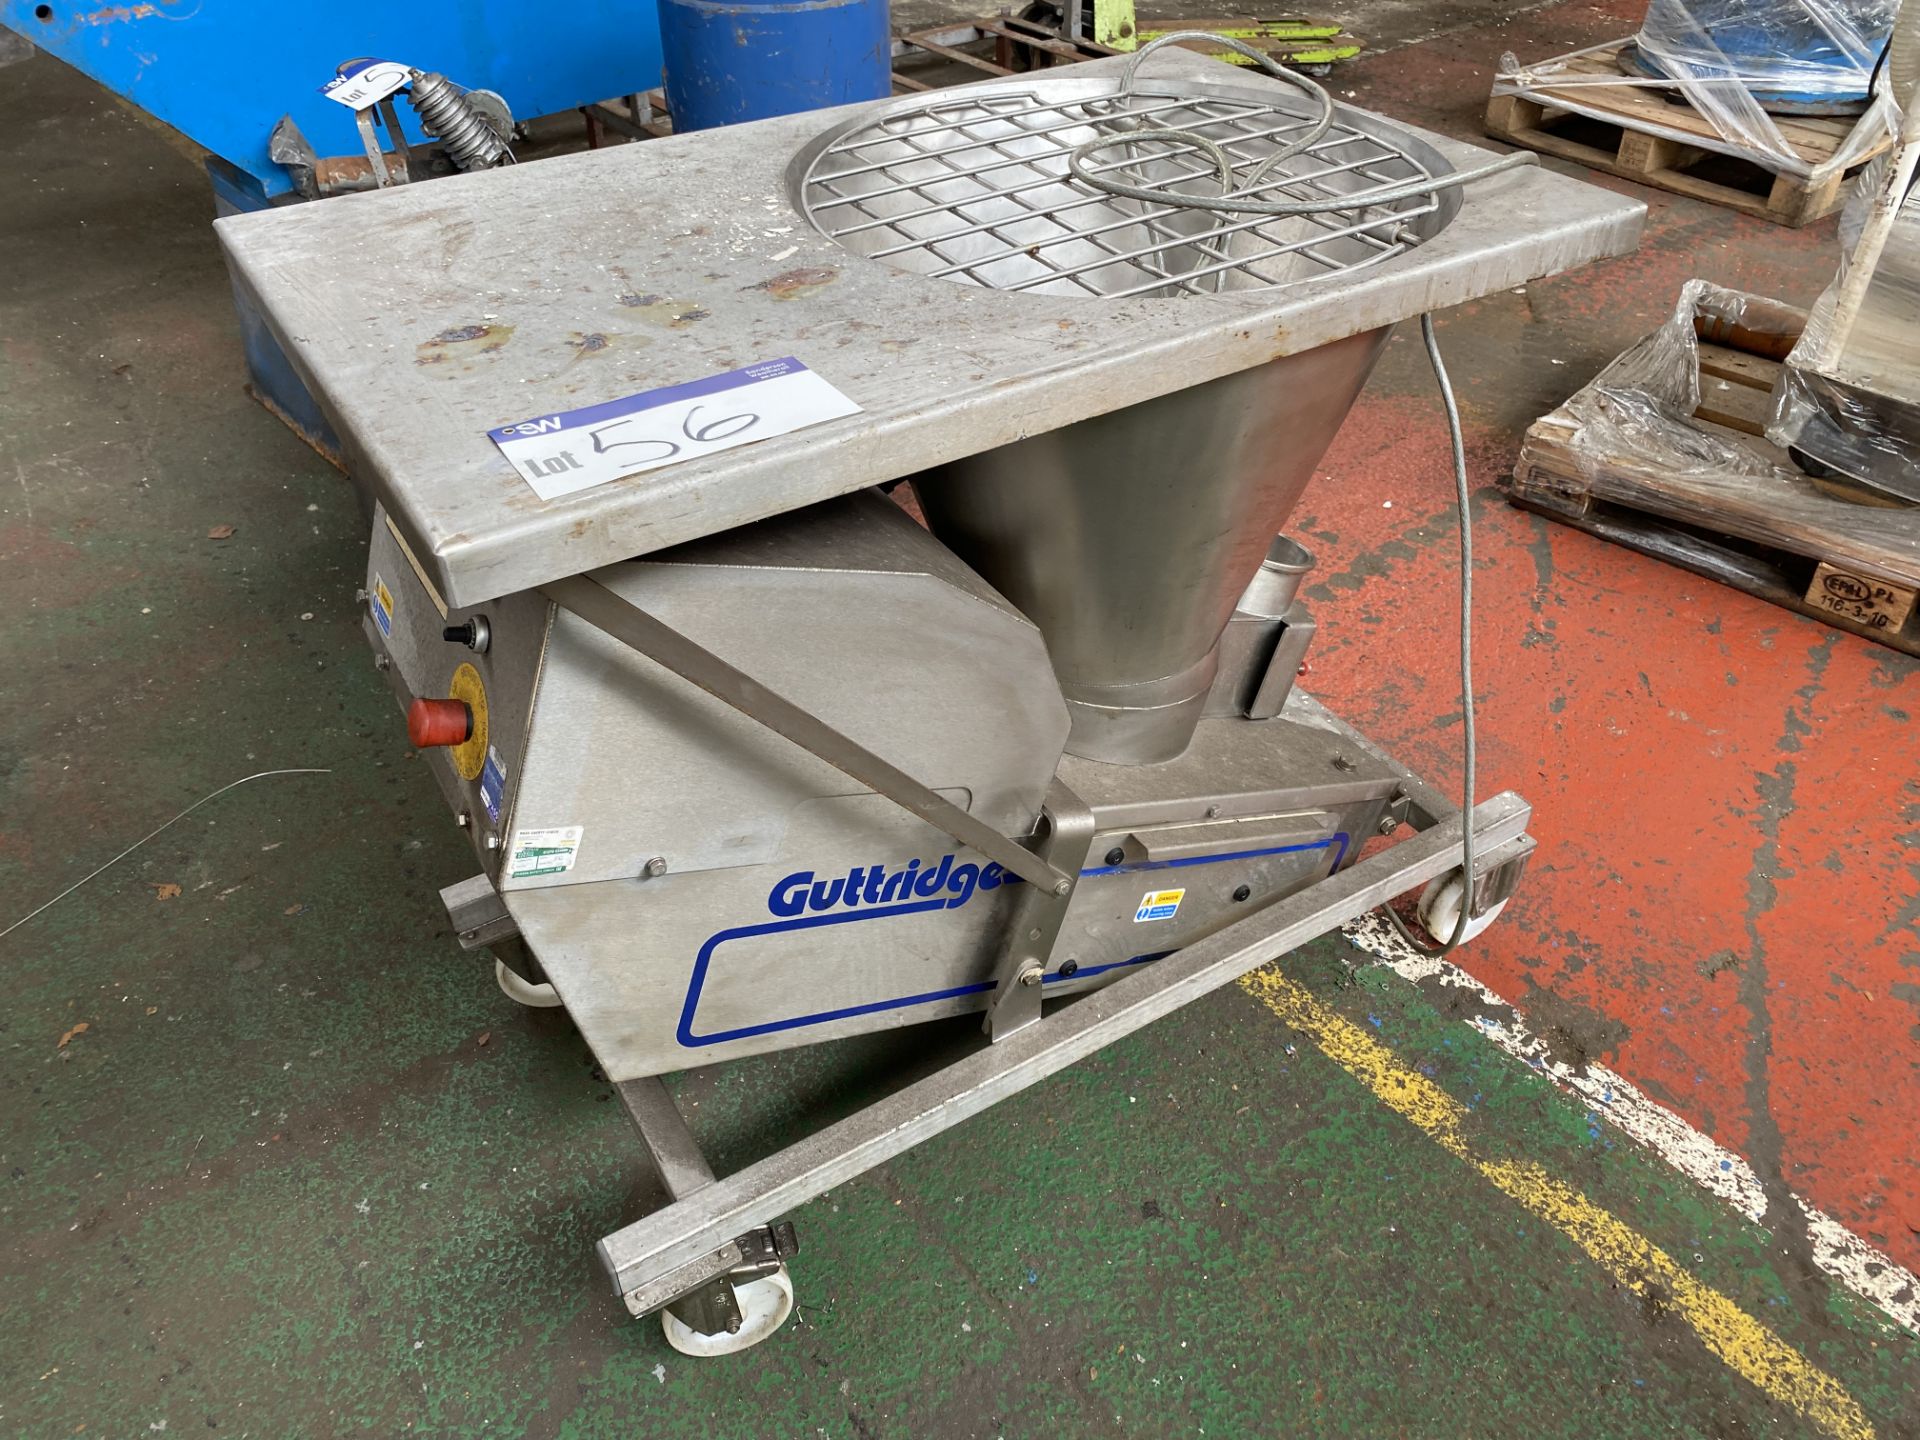 Guttridge STAINLESS STEEL MOBILE HOPPER FEED UNIT, serial no. 266815, year of manufacture 03/